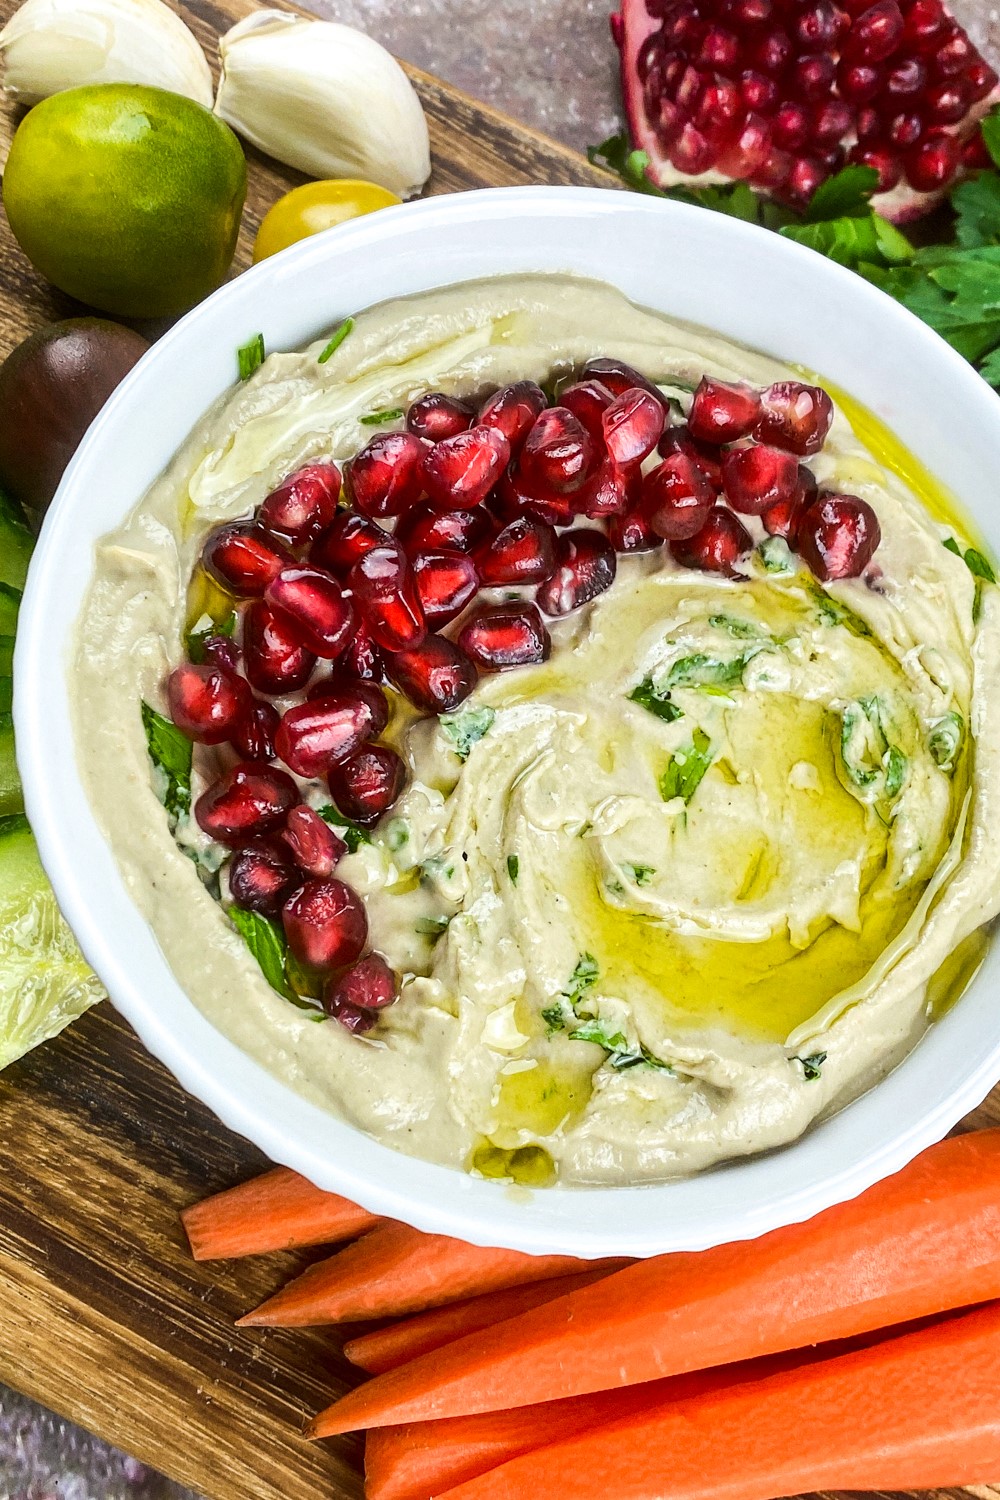 Baba Ganoush is an easy, delicious, vegan friendly Middle Eastern dip that makes a wonderful addition to any party spread.